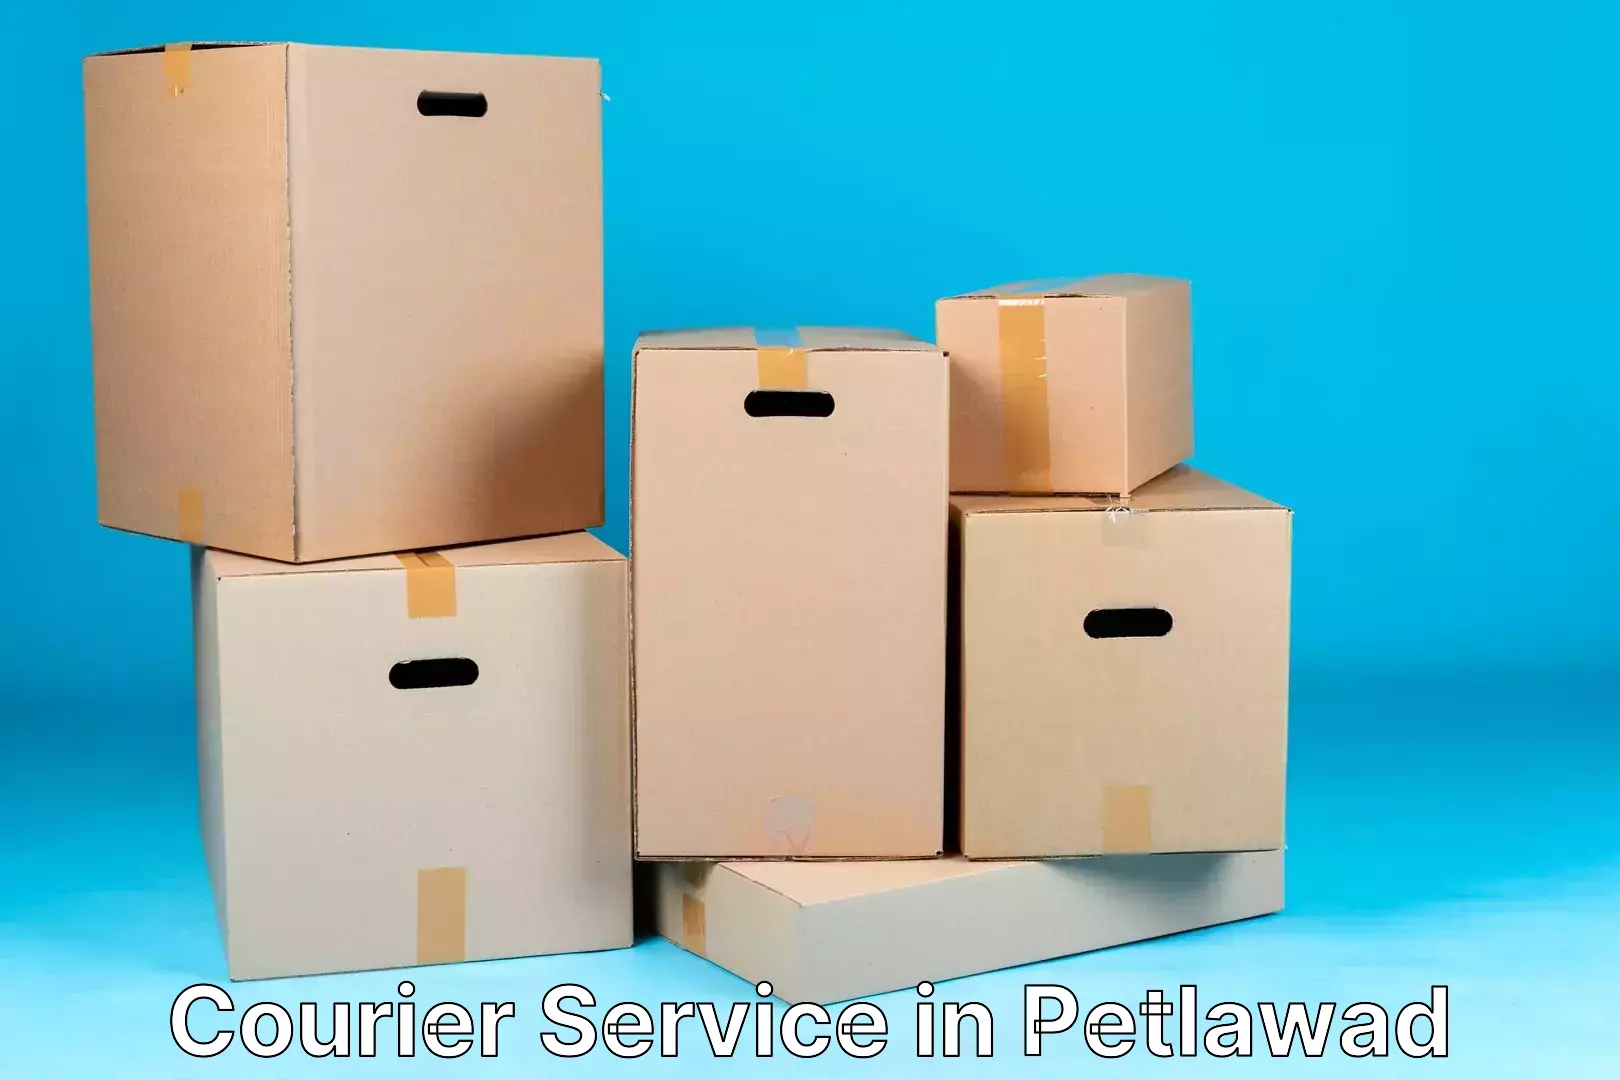 Affordable parcel rates in Petlawad